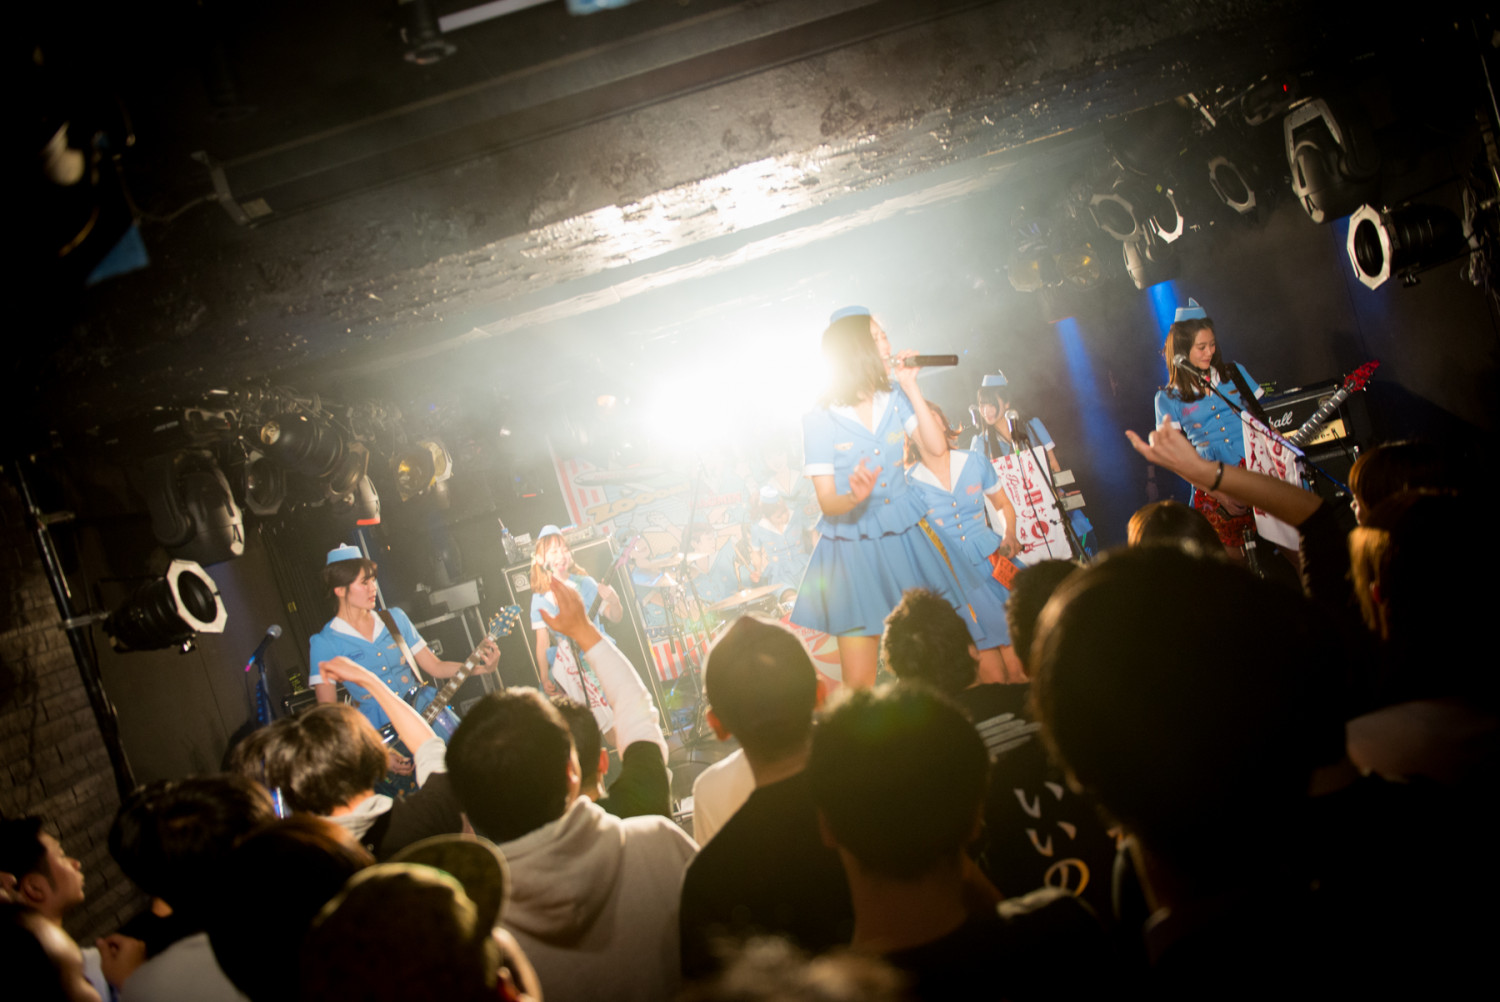 PASSPO☆ Kicked Off Their Nationwide Tour in Band Style